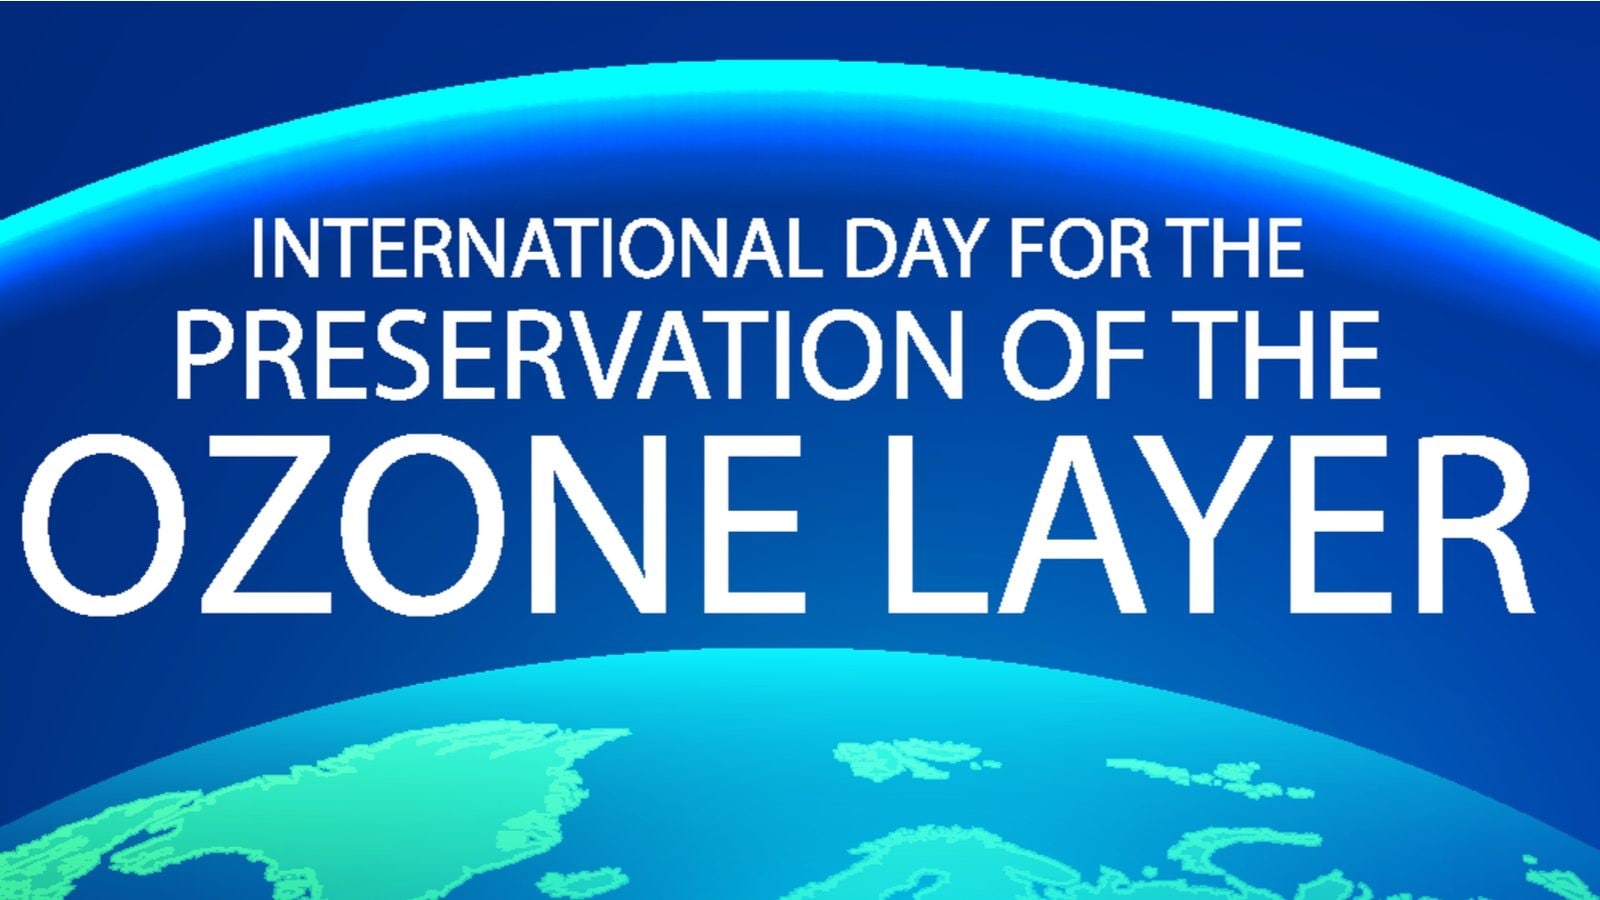 International Day for the Preservation of the Ozone Layer 2021: Theme, History and Significance